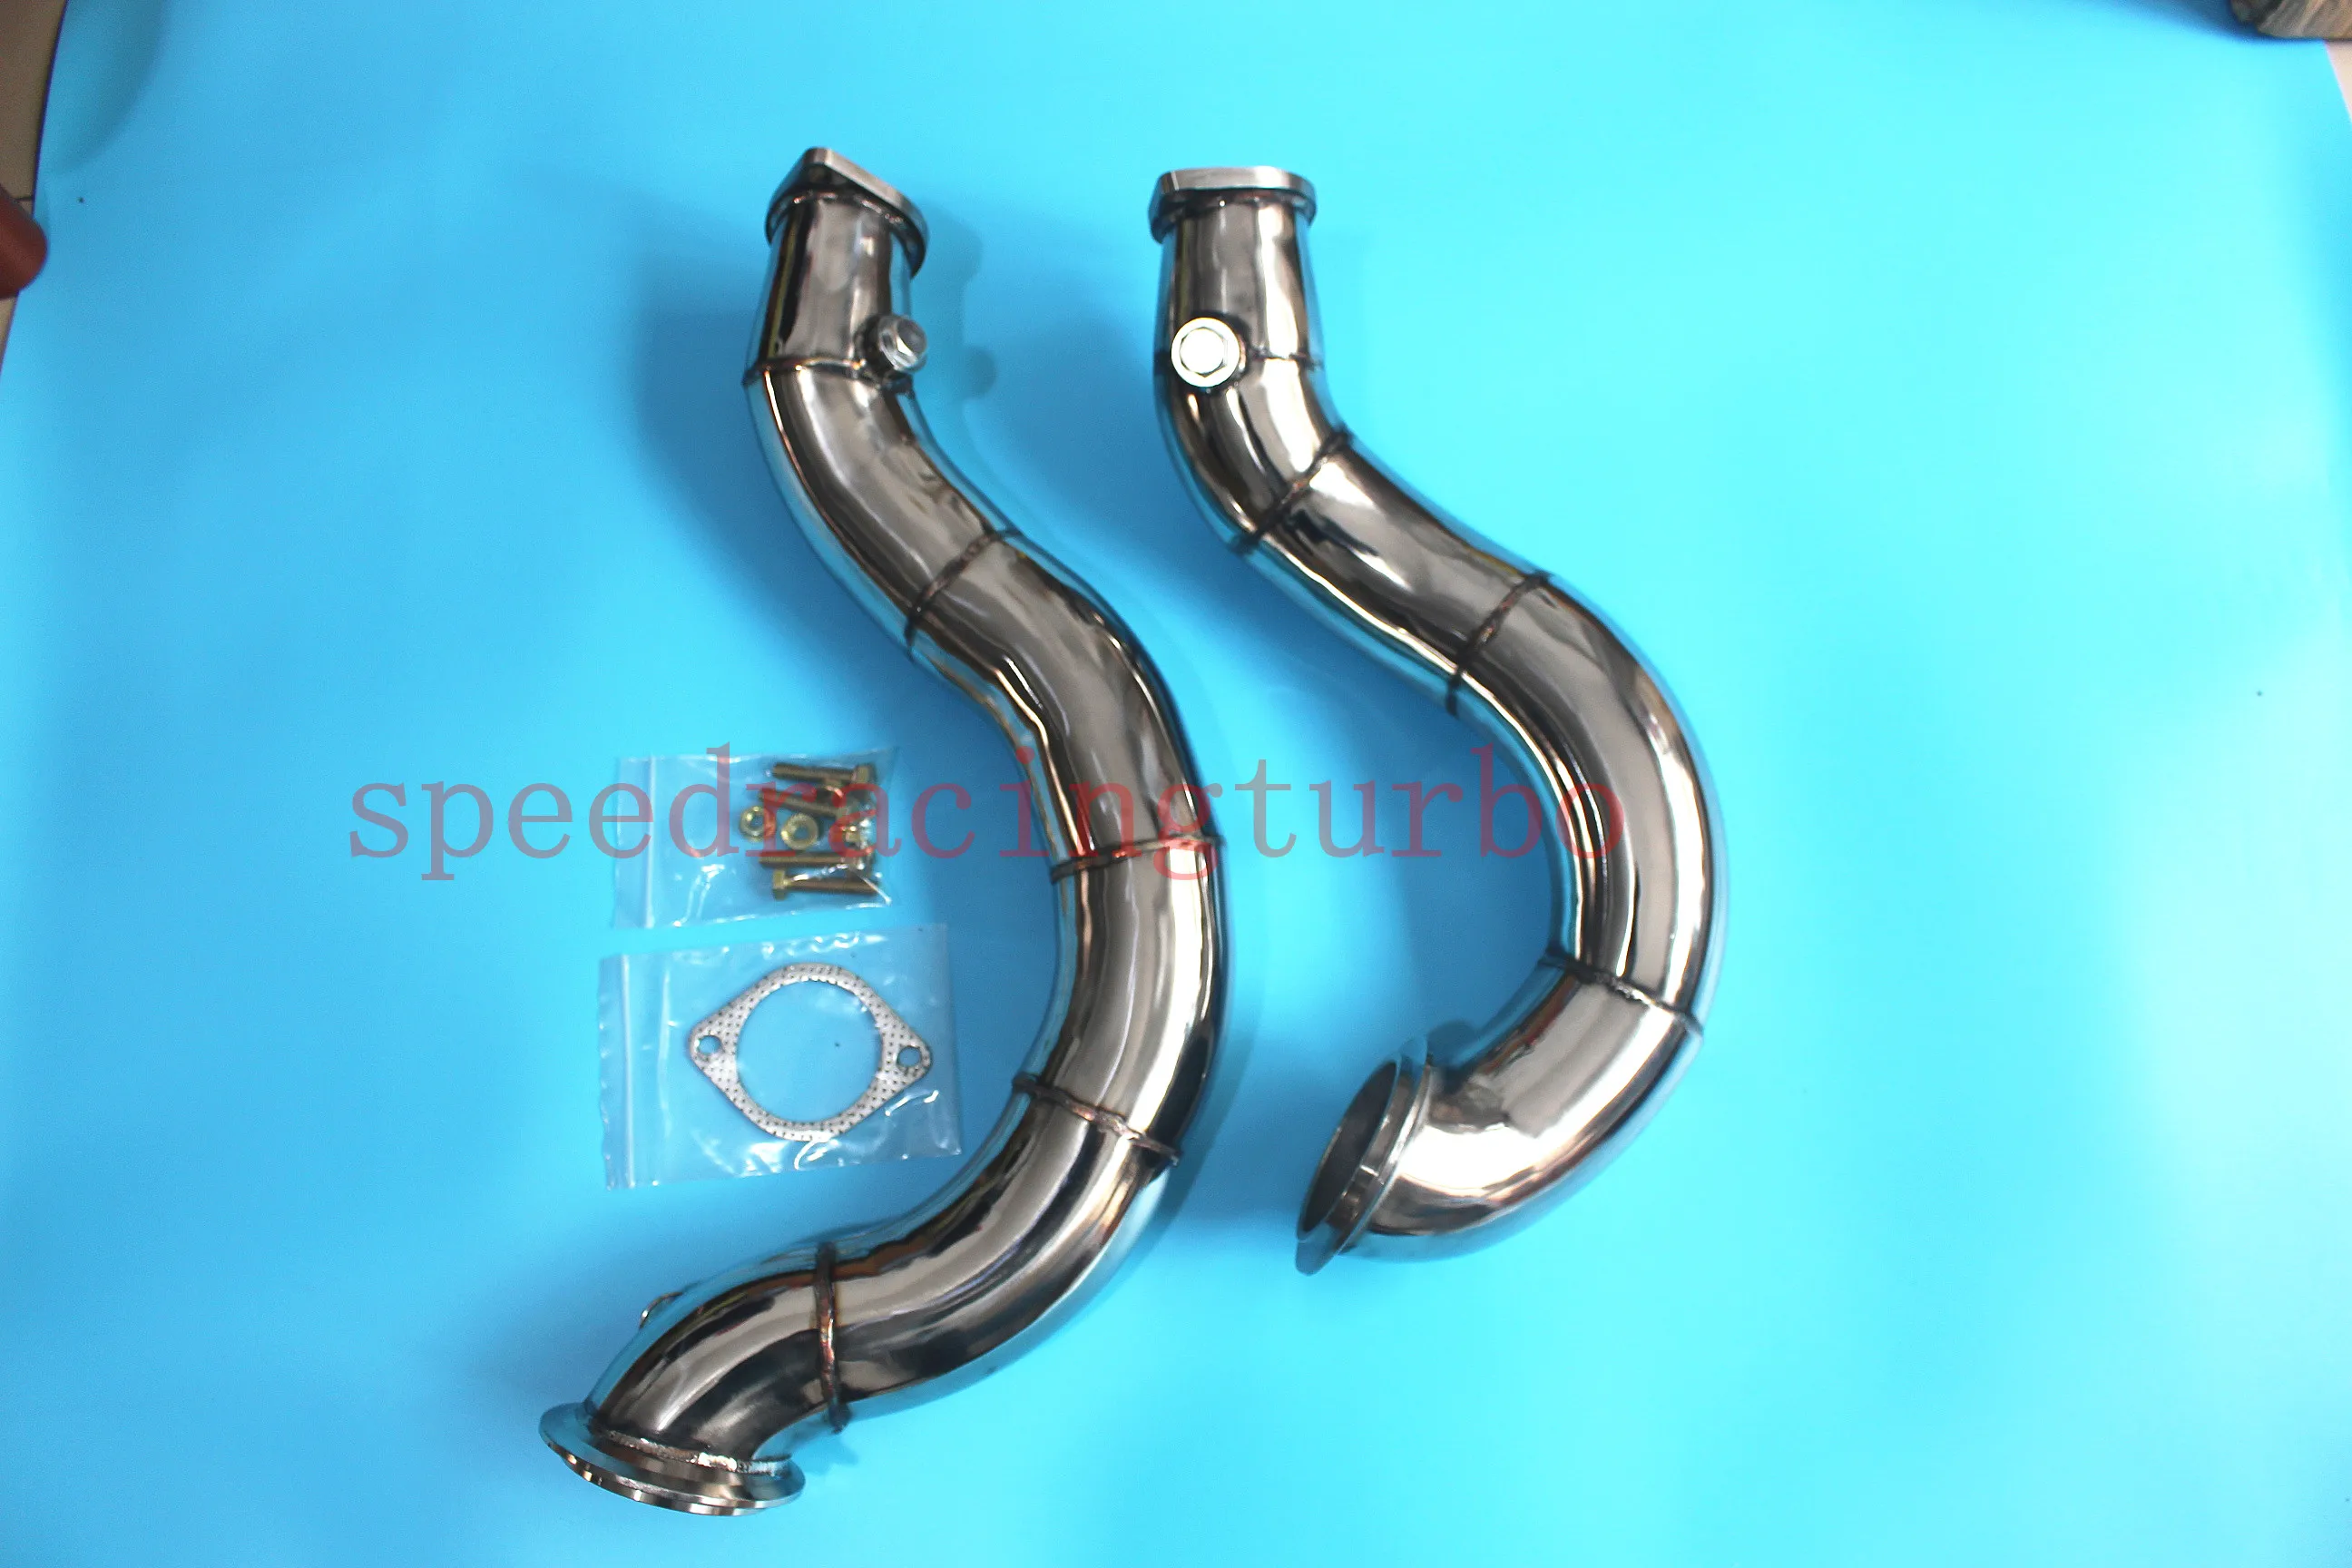 

STAINLESS TURBO EXHAUST FLEX DOWN PIPE FOR 08-14 X6/X5/5-/7-SERIES N63B44 4.4 V8